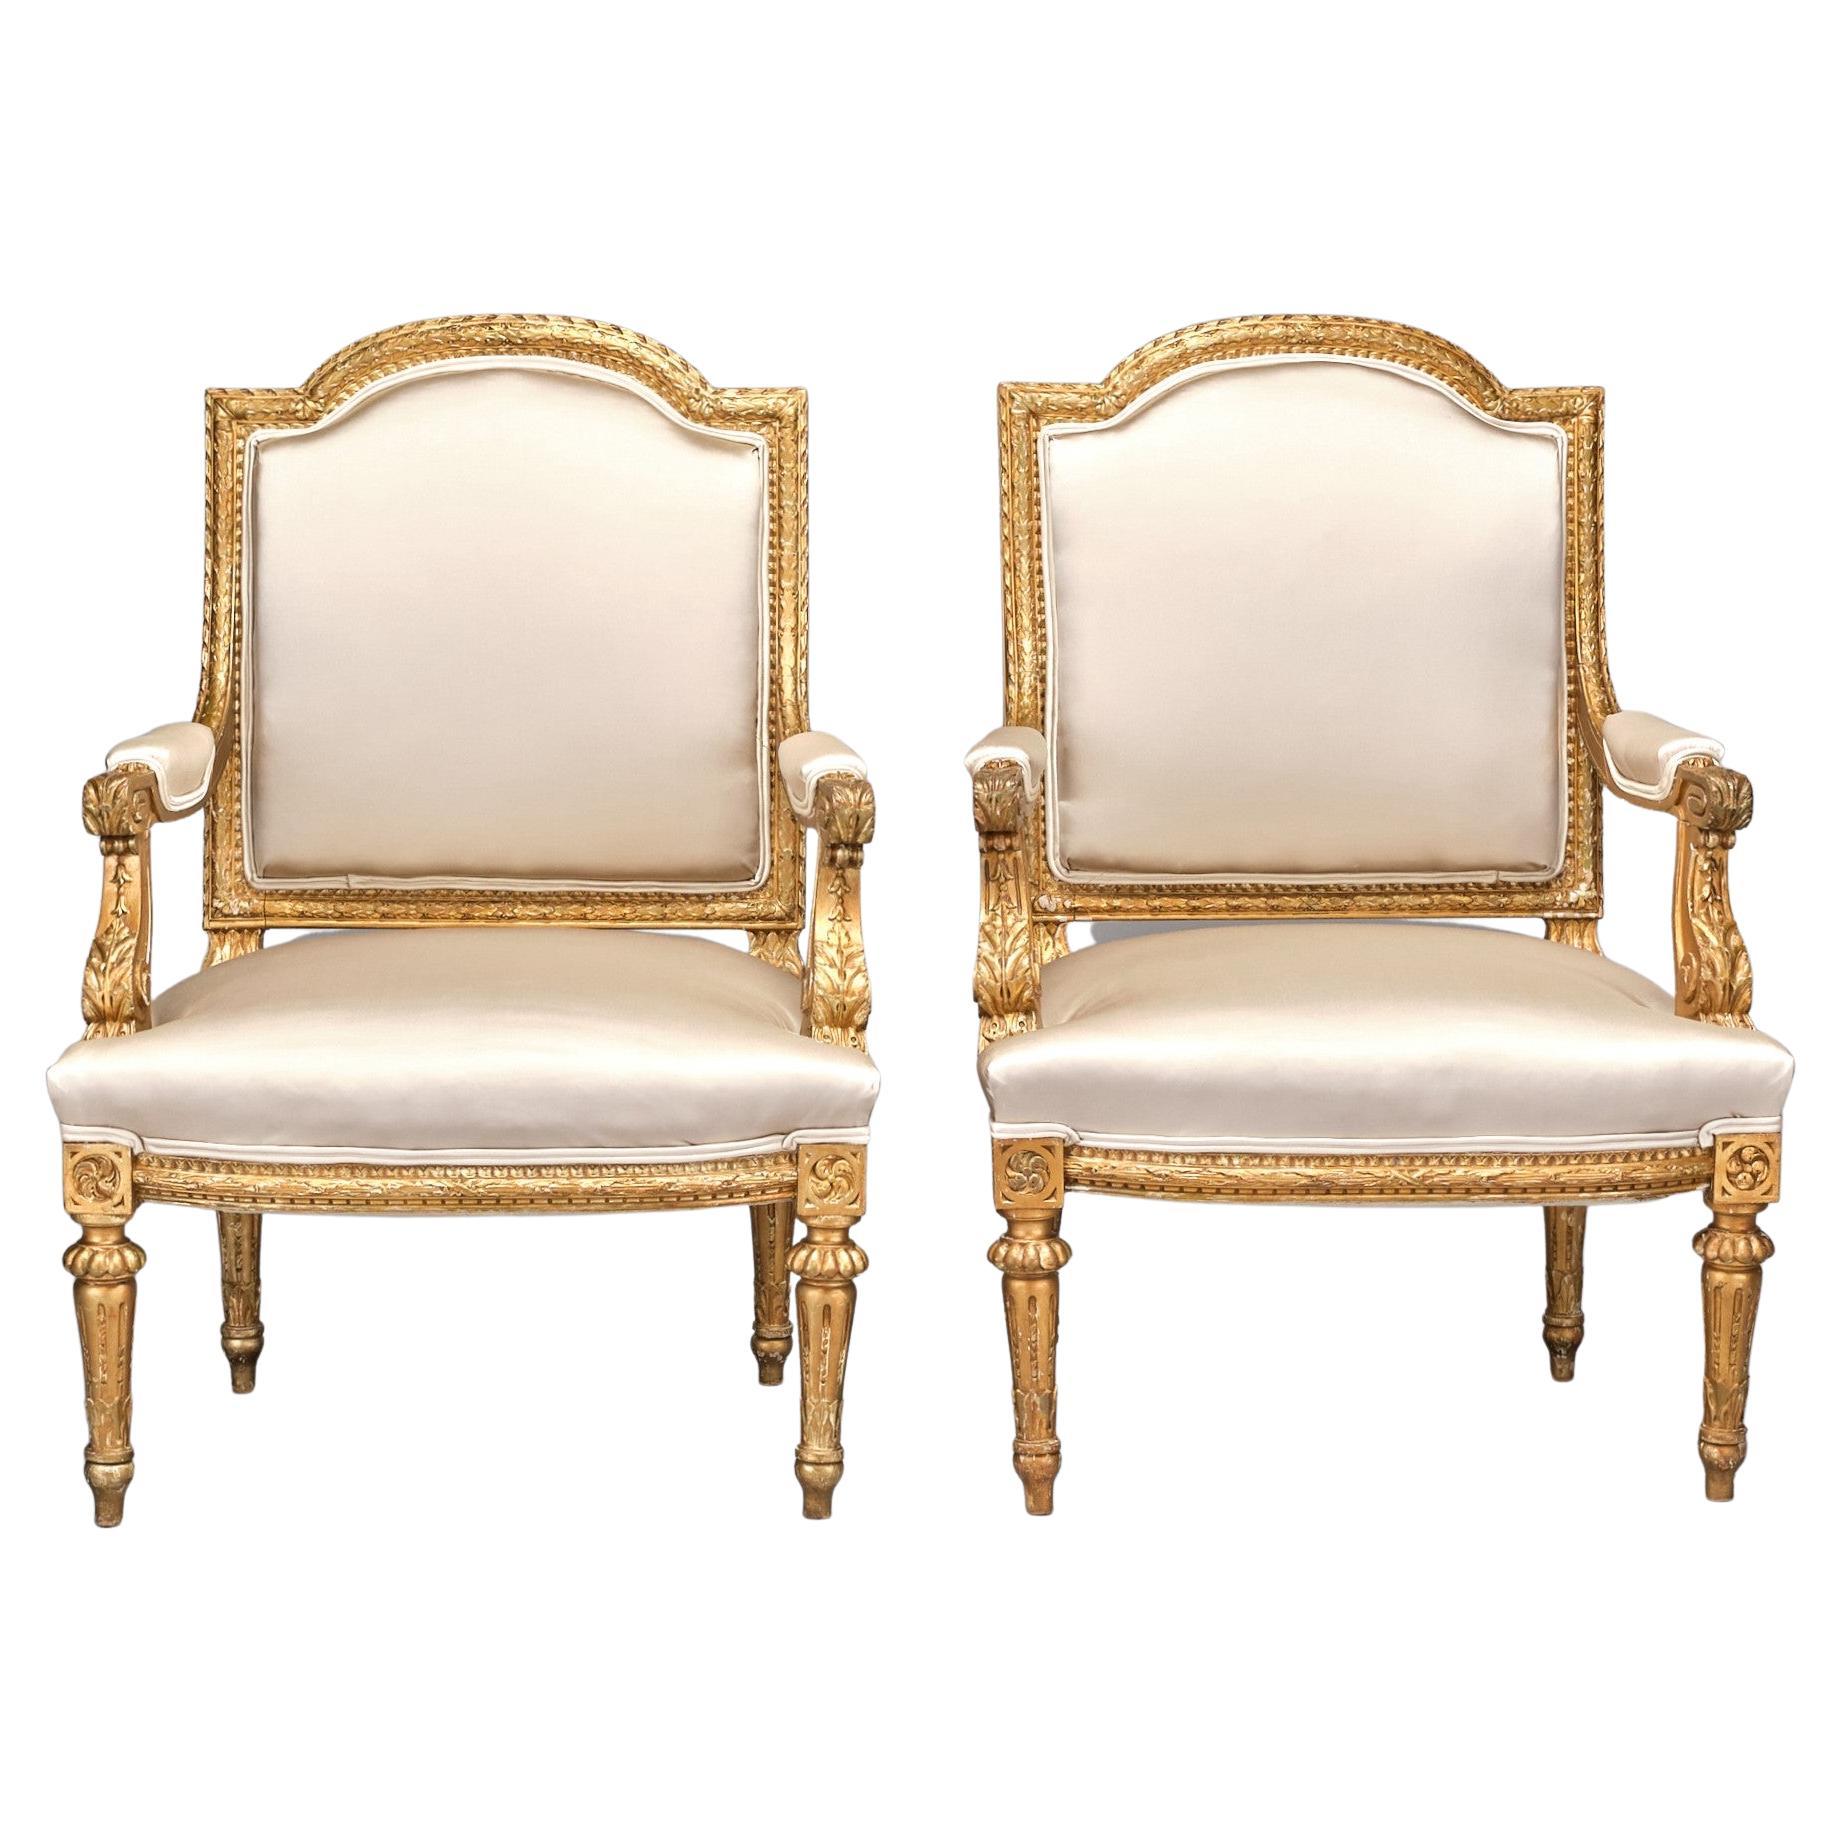 Pair of Louis XVI Style Giltwood Fauteuils / Armchairs, France Circa 1900